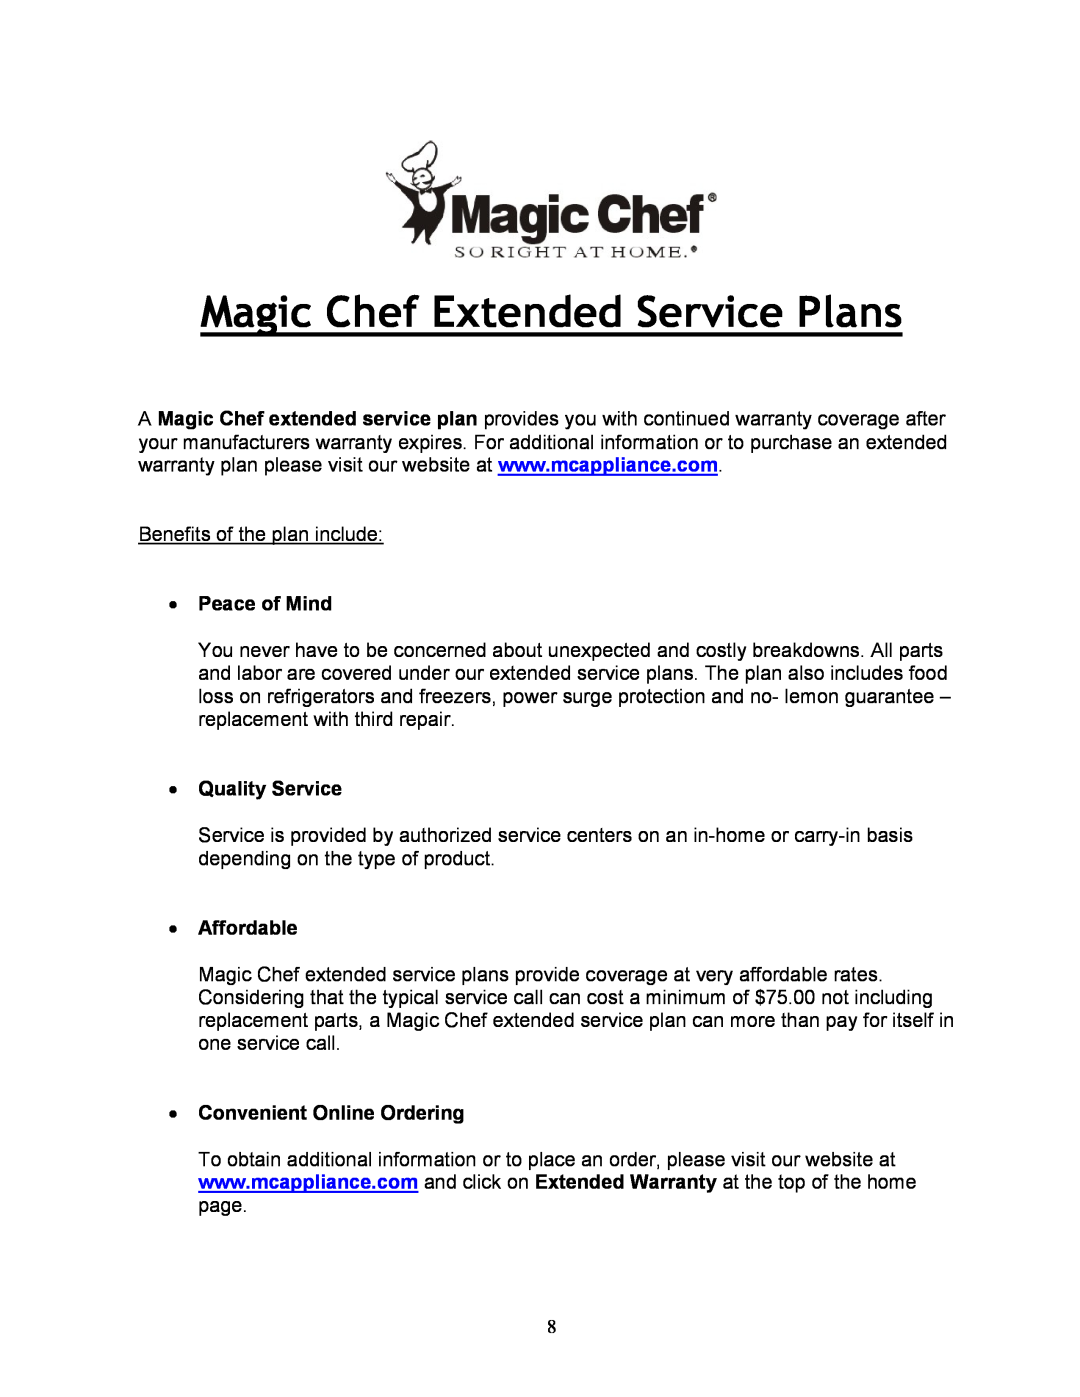 Magic Chef MCUF88W instruction manual Peace of Mind, Quality Service, Affordable, Convenient Online Ordering 